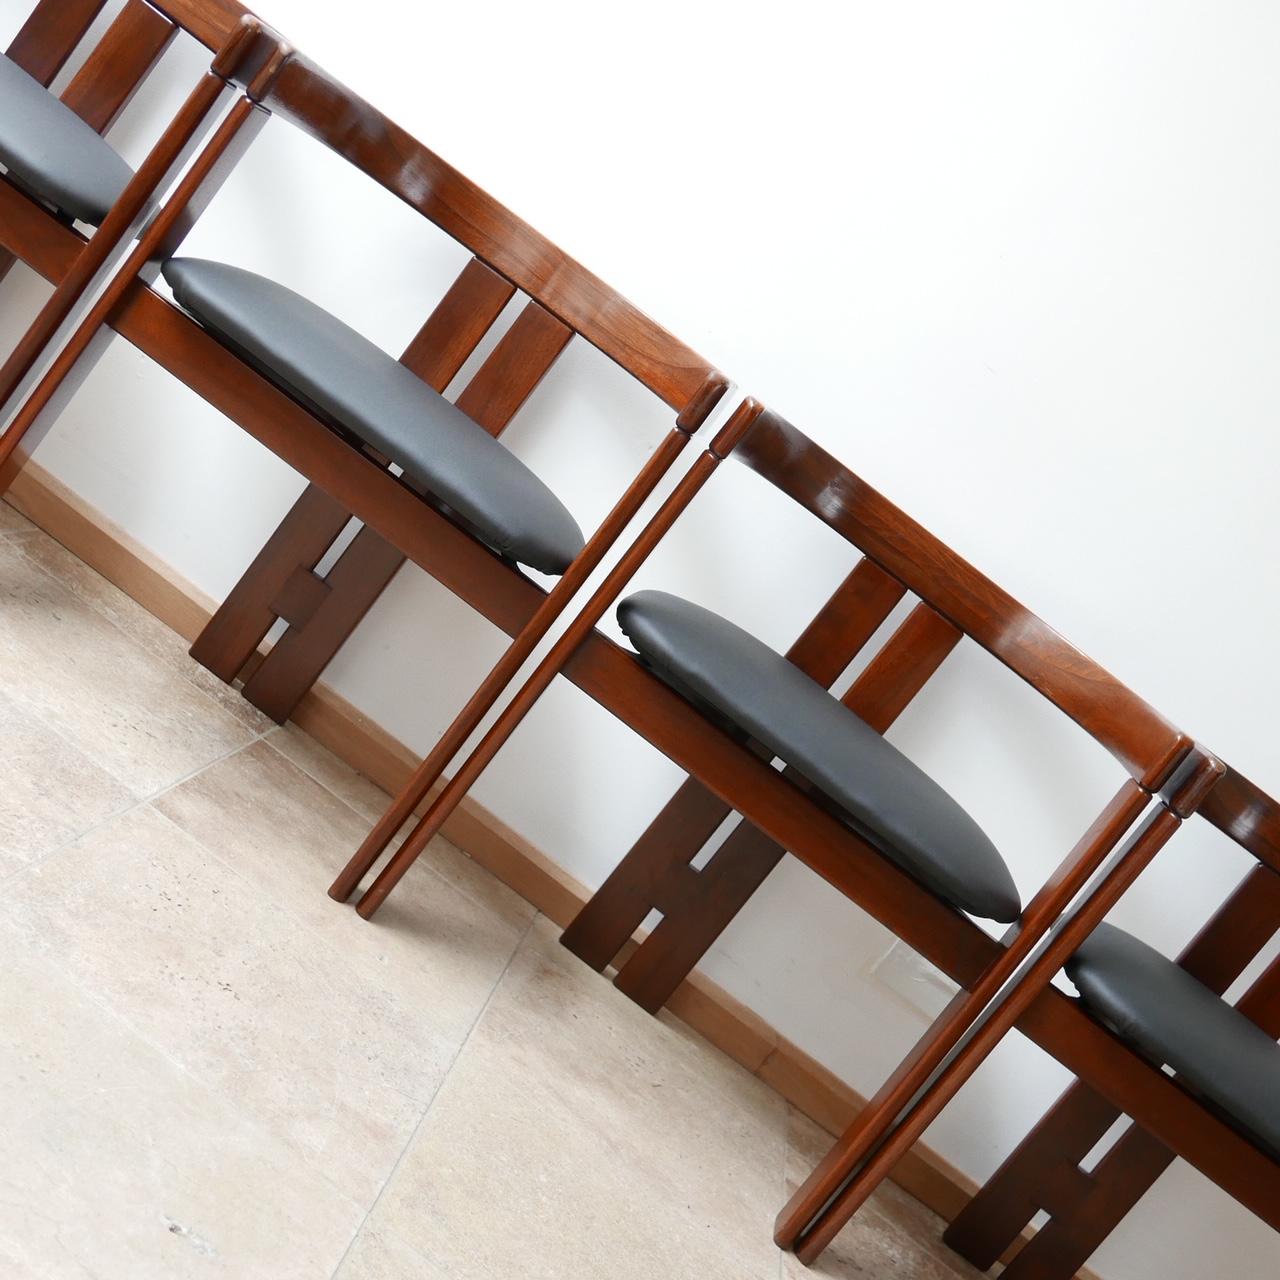 'Pigreco' Italian Midcentury Dining Chairs Attributed to Tobia Scarpa 8